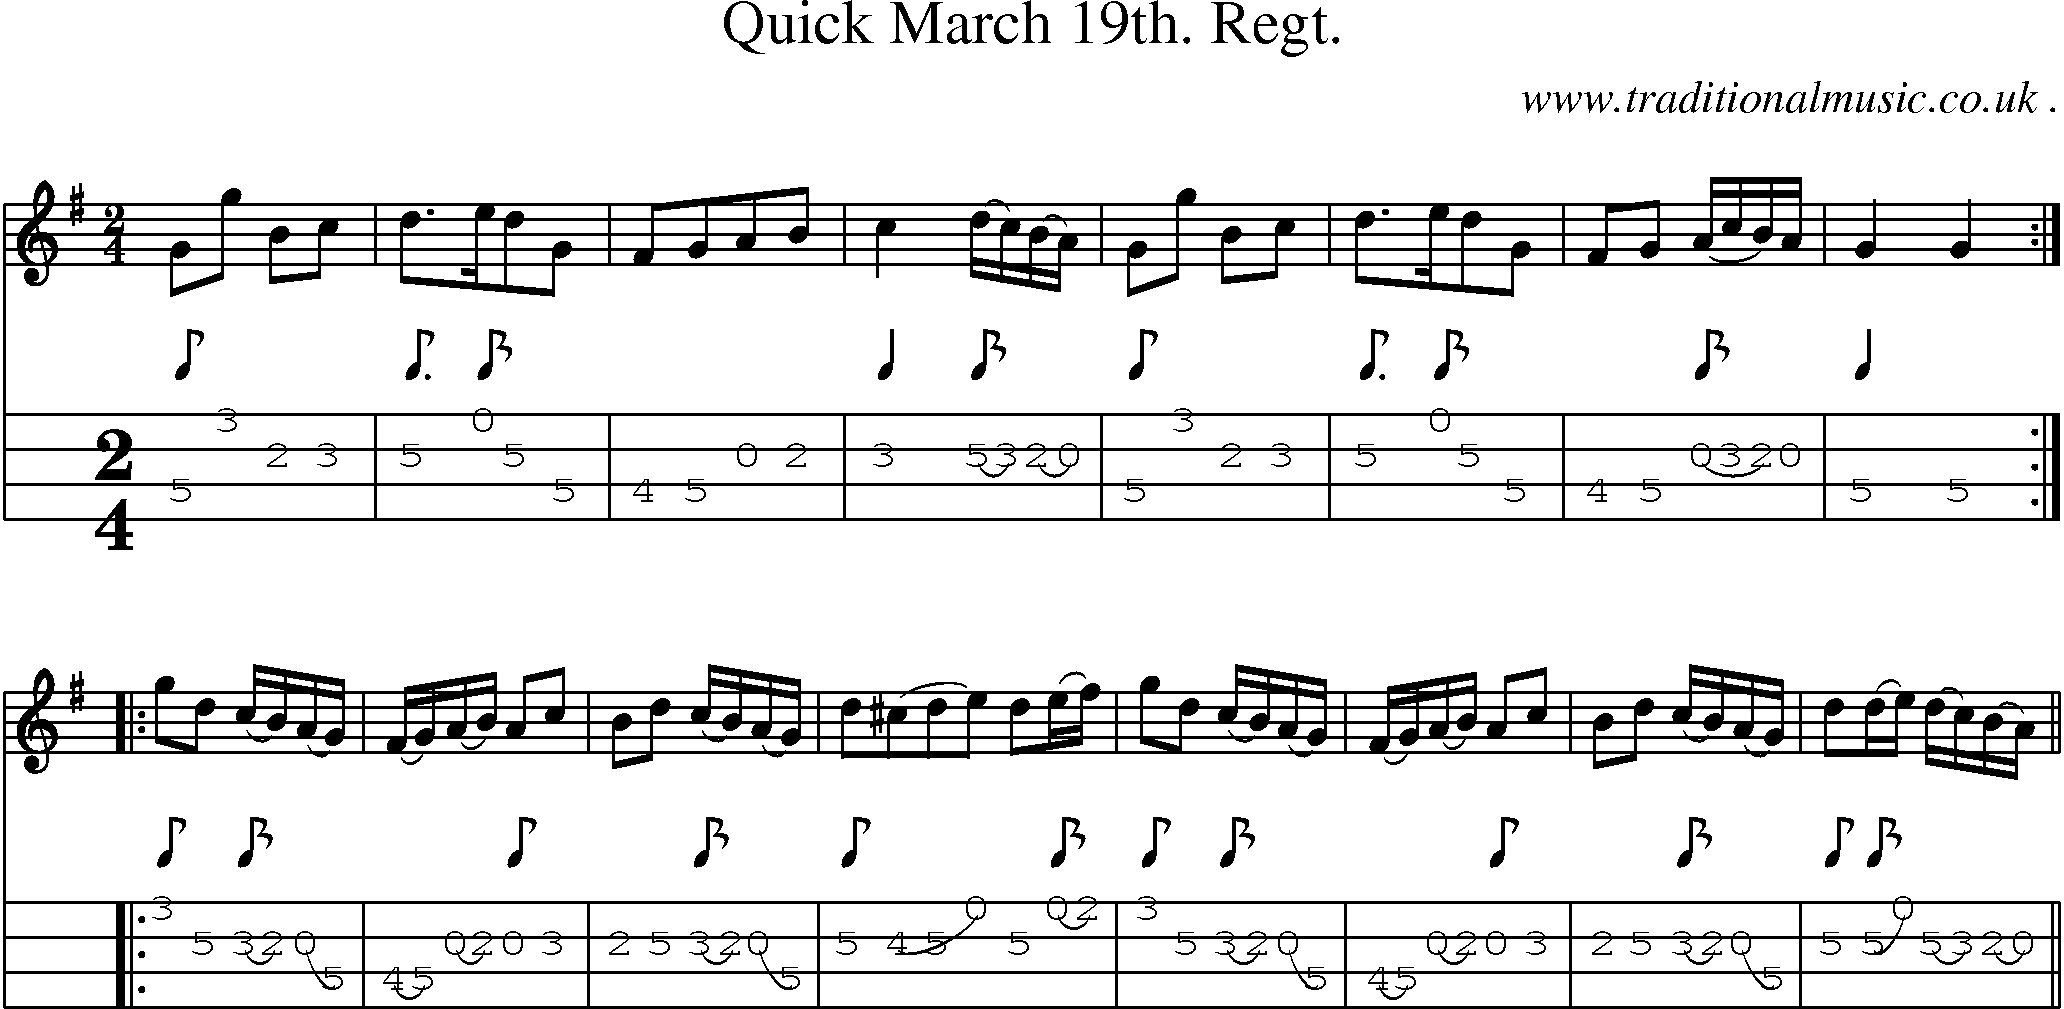 Sheet-music  score, Chords and Mandolin Tabs for Quick March 19th Regt